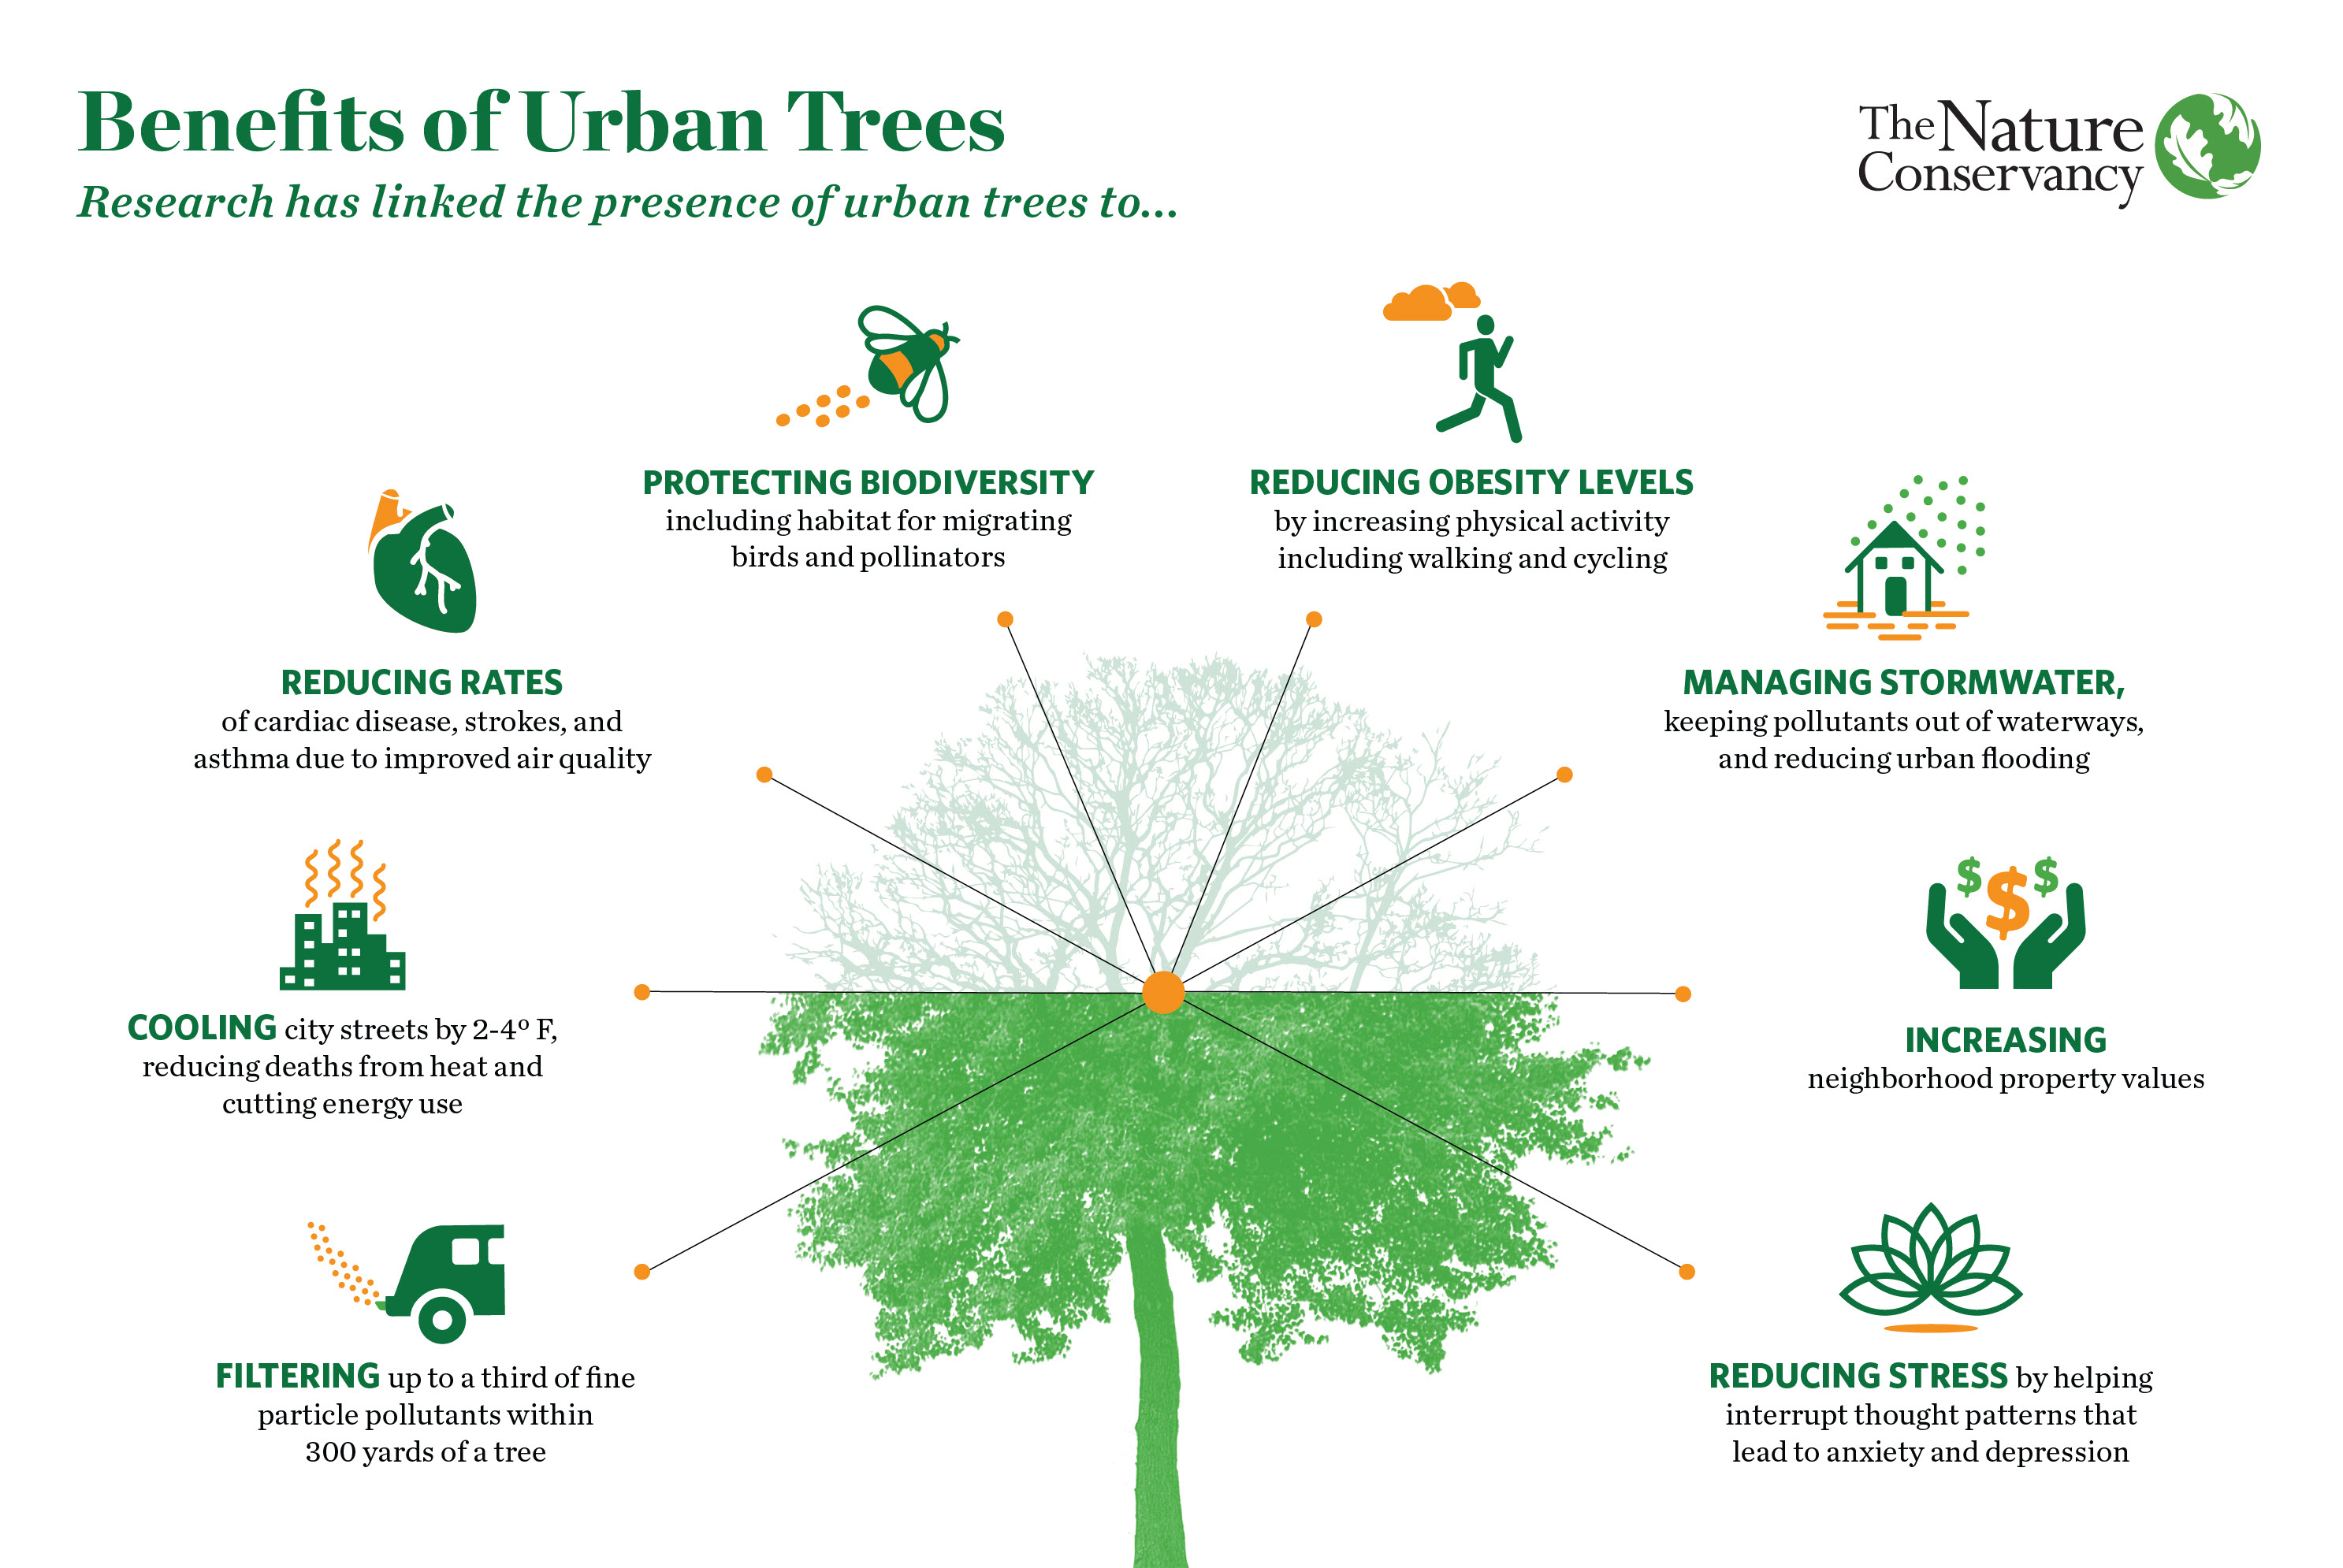 TNC-benefits-of-trees-used-with-permission